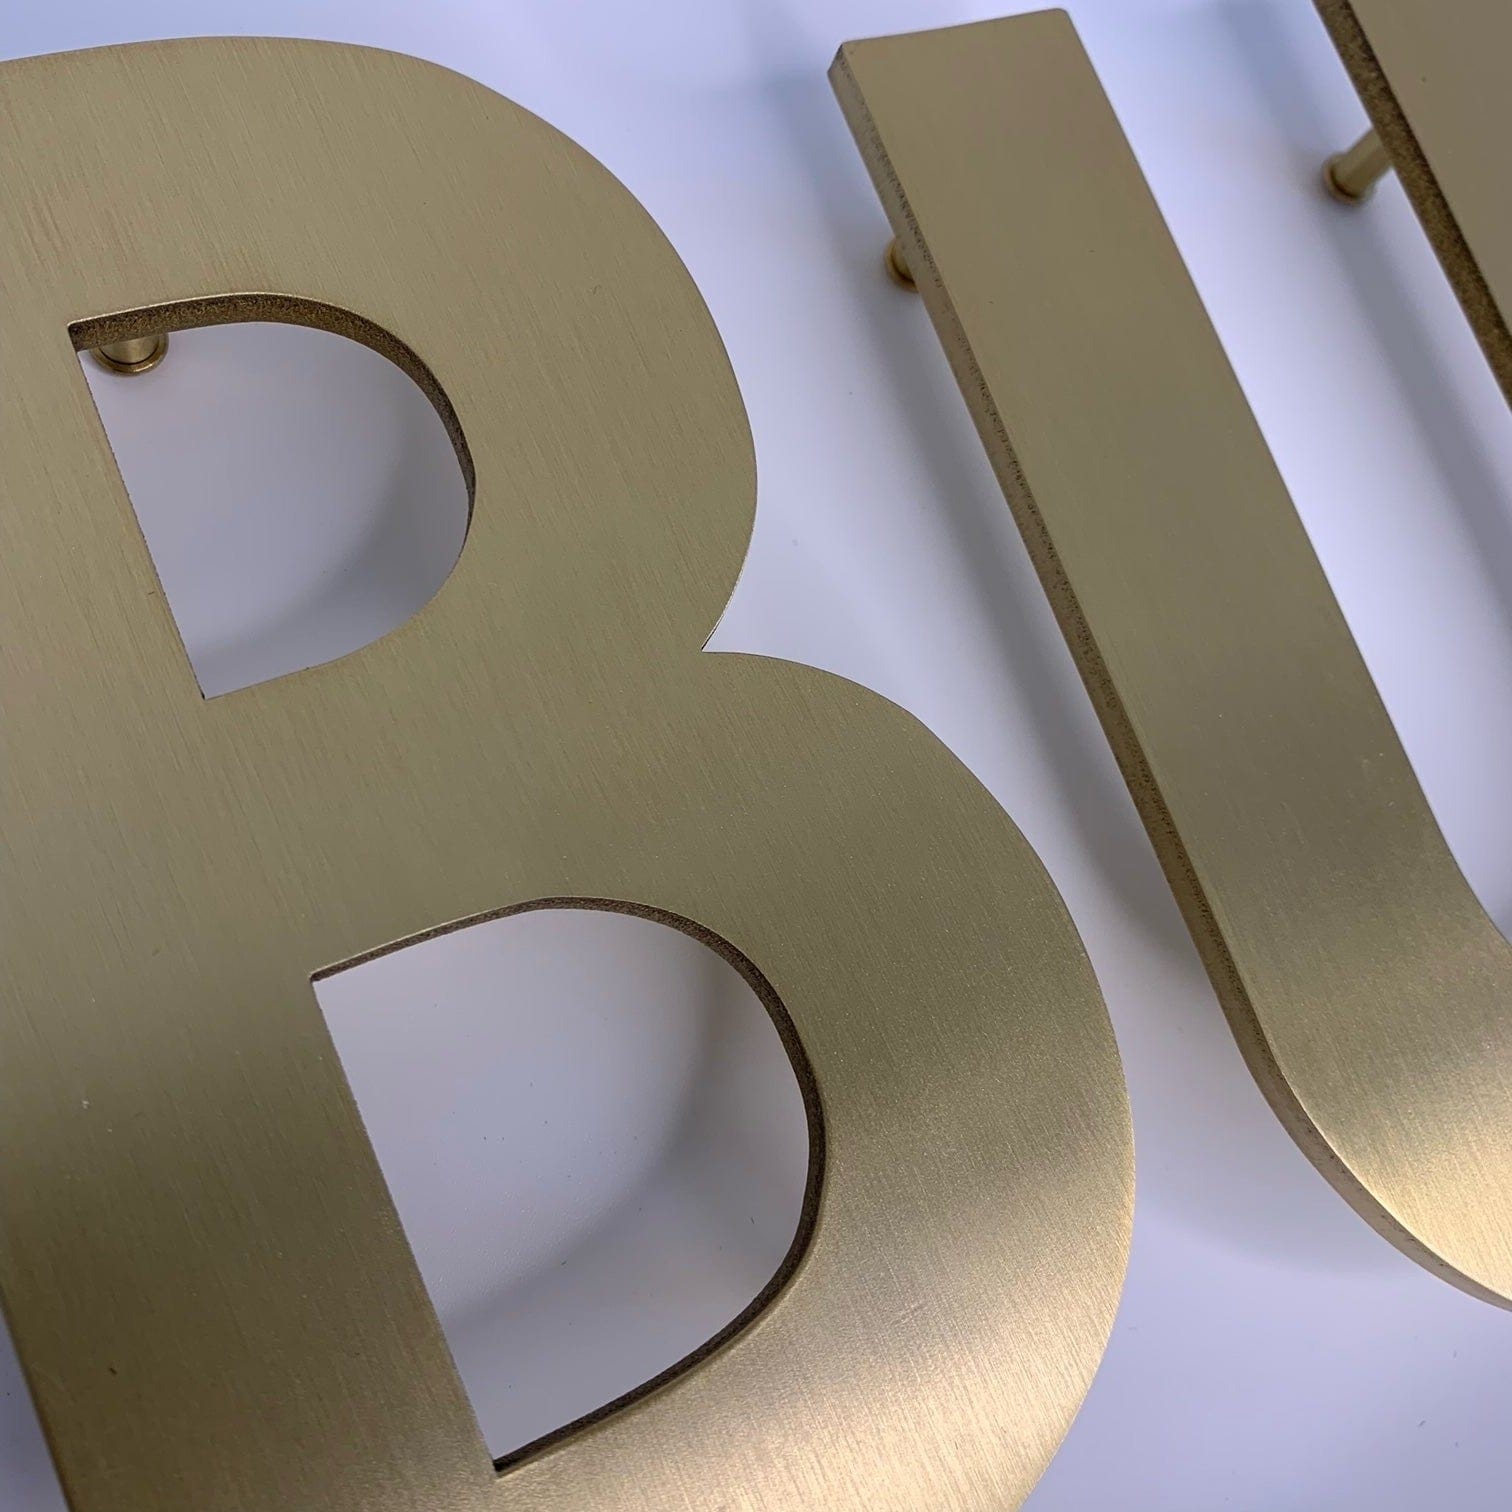 House Numbers and Letters Bayside Luxe Signage - Solid Satin Brass Floating House Numbers and Letters - Beaumaris Bay 25 cm